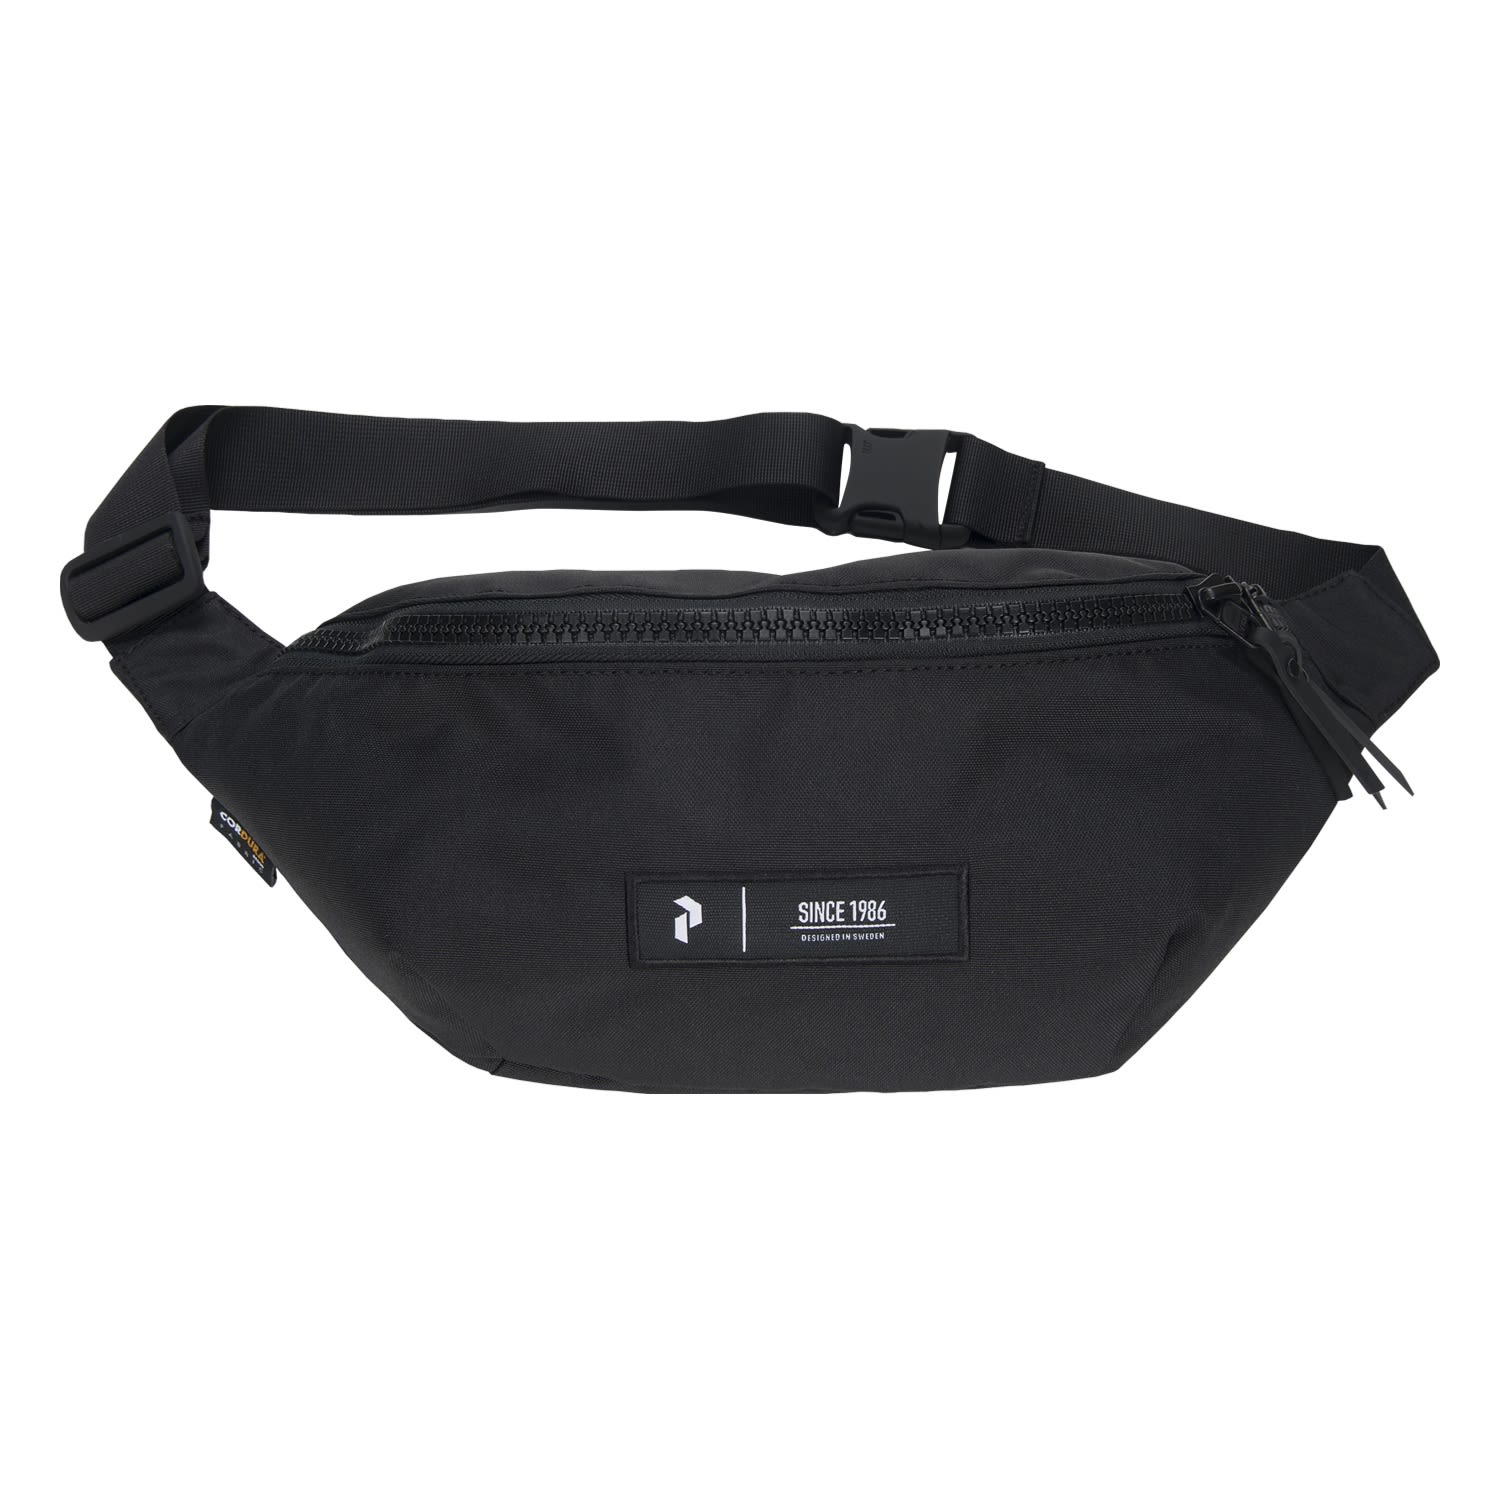 Buy Peak Performance Outdoor Sling Bag from Outnorth